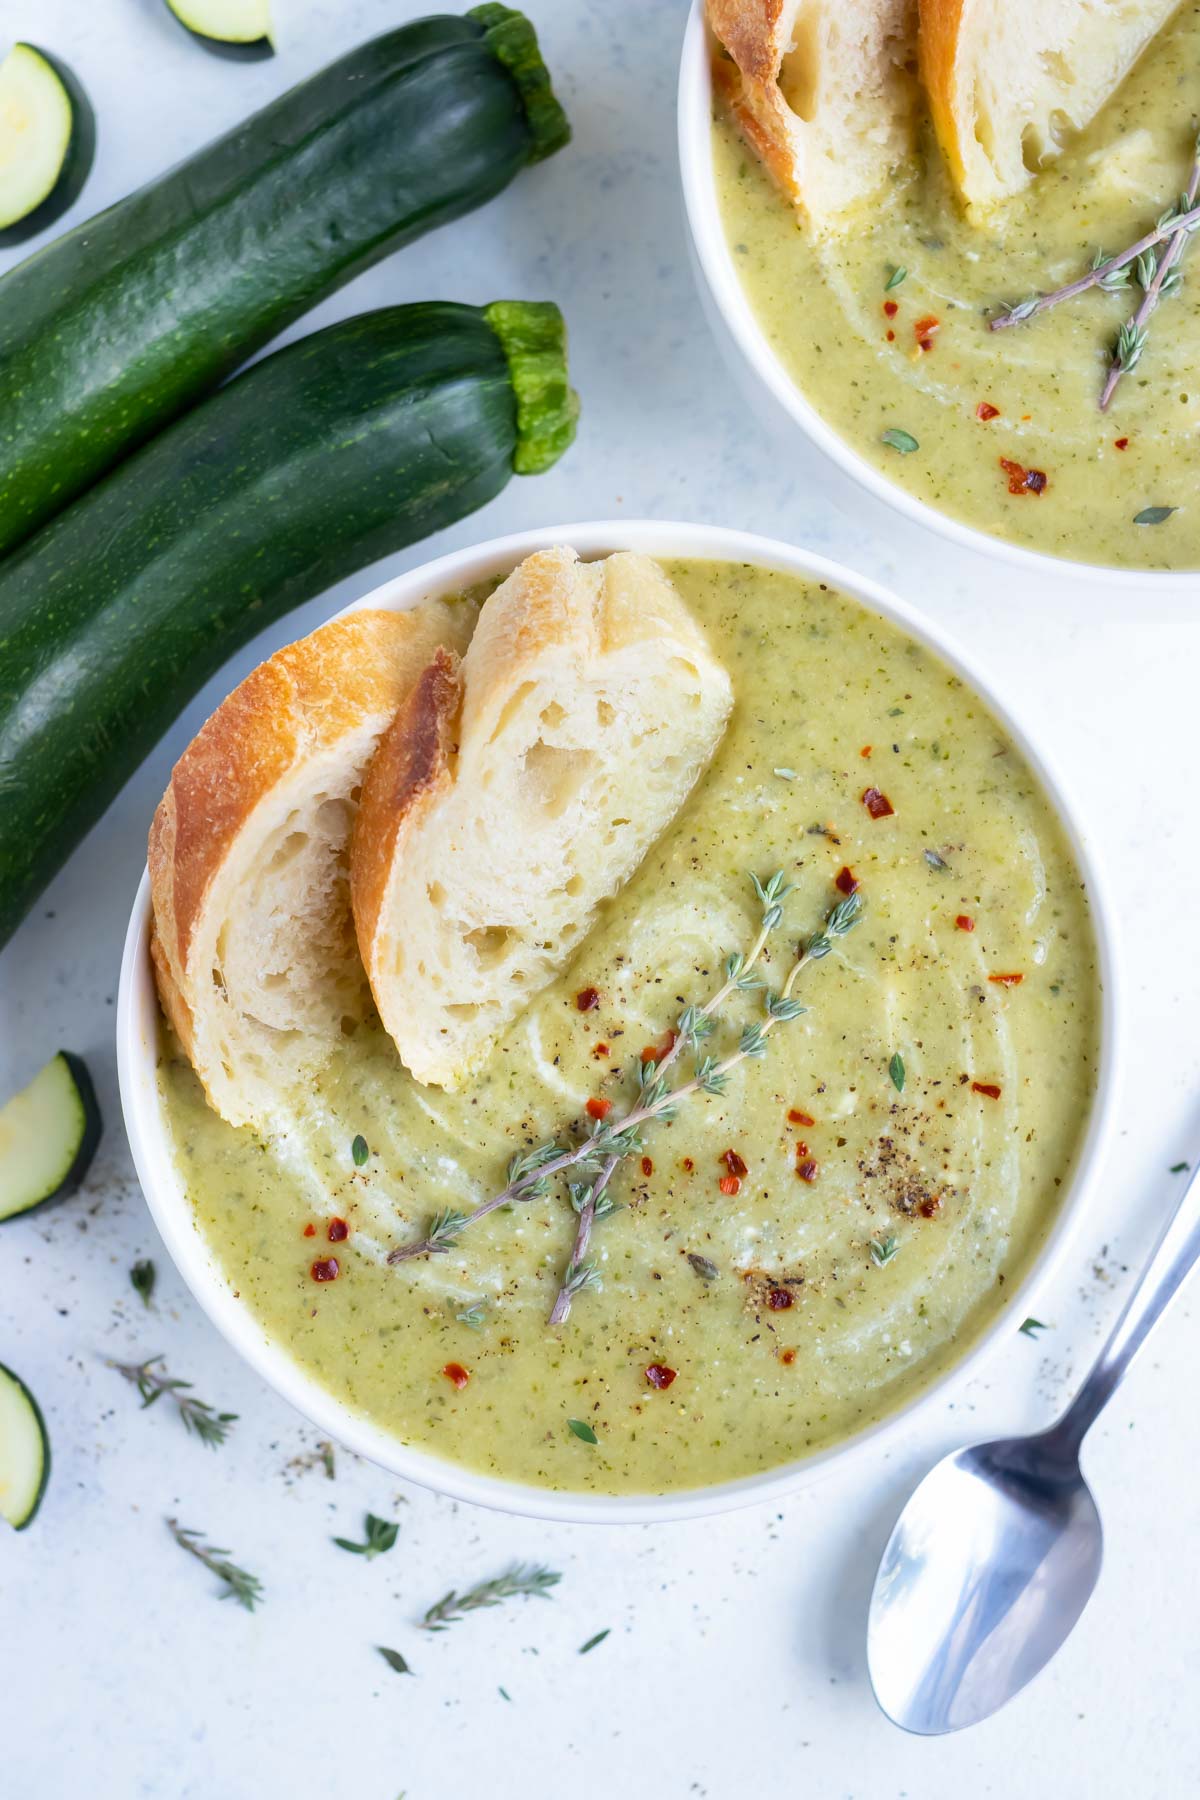 A bowl of zucchini soup is enjoyed with bread.